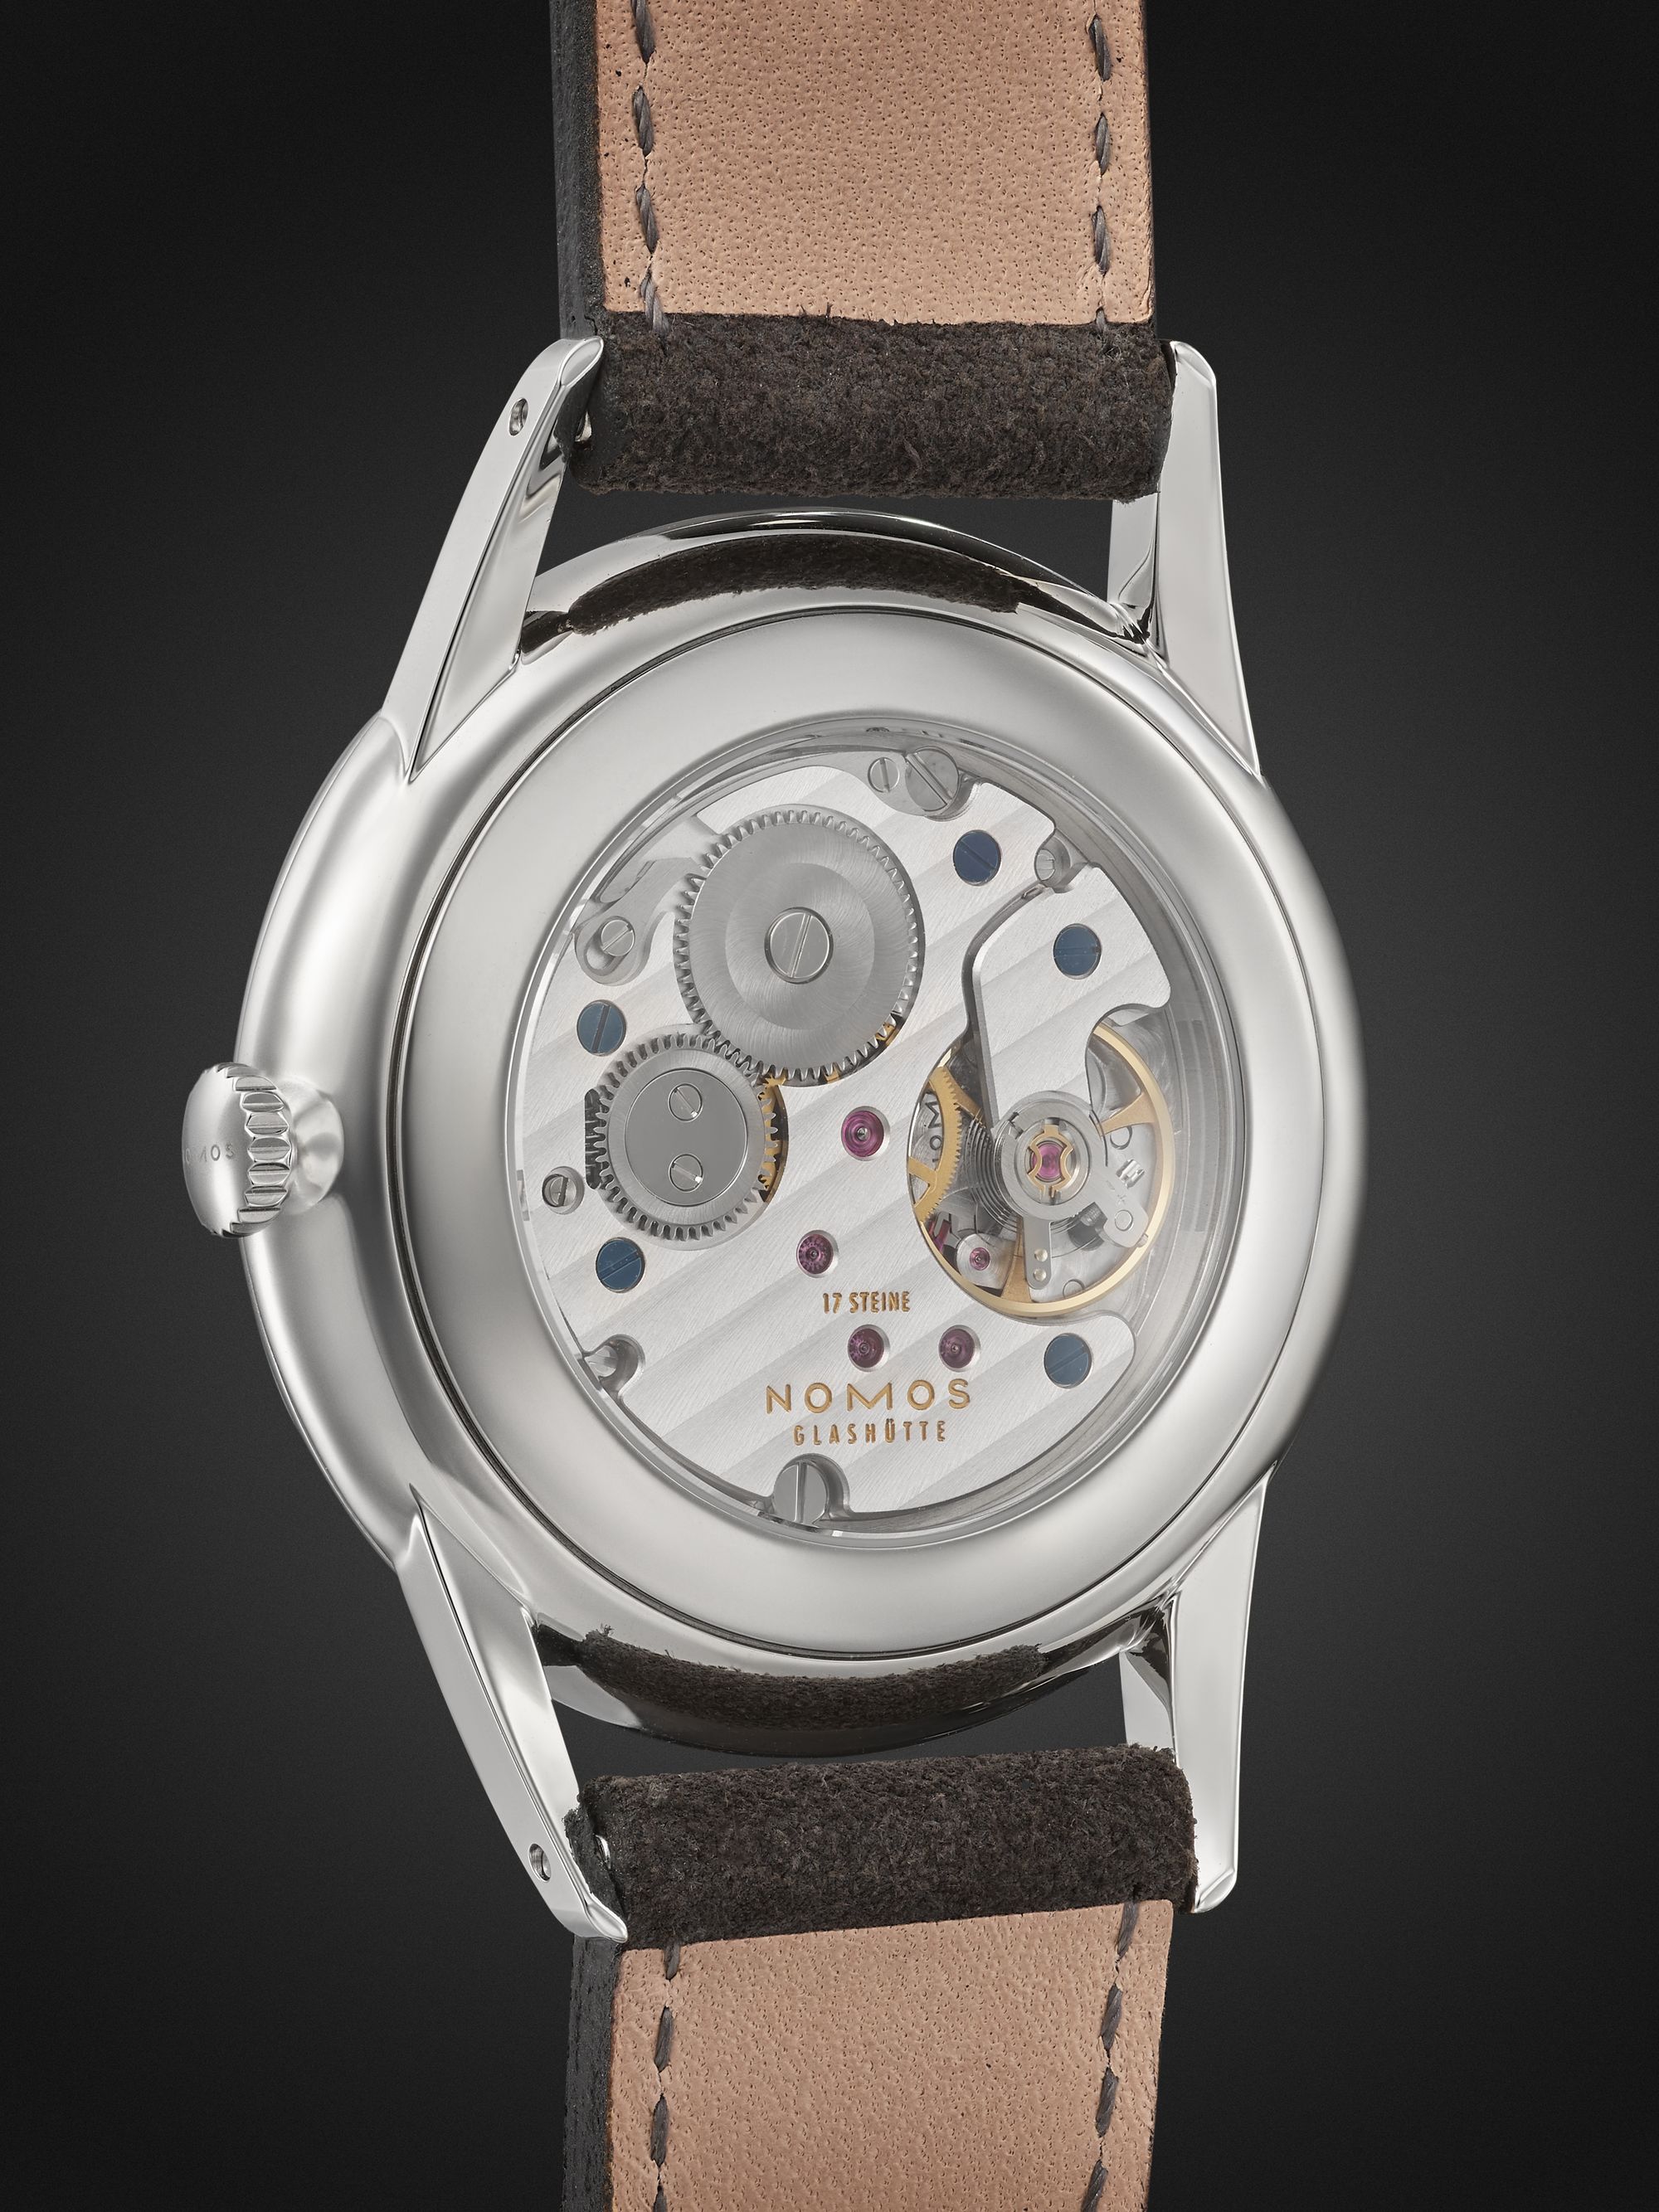 NOMOS GLASHÜTTE Orion Hand-Wound 38mm Stainless Steel and Suede Watch, Ref. No. 379